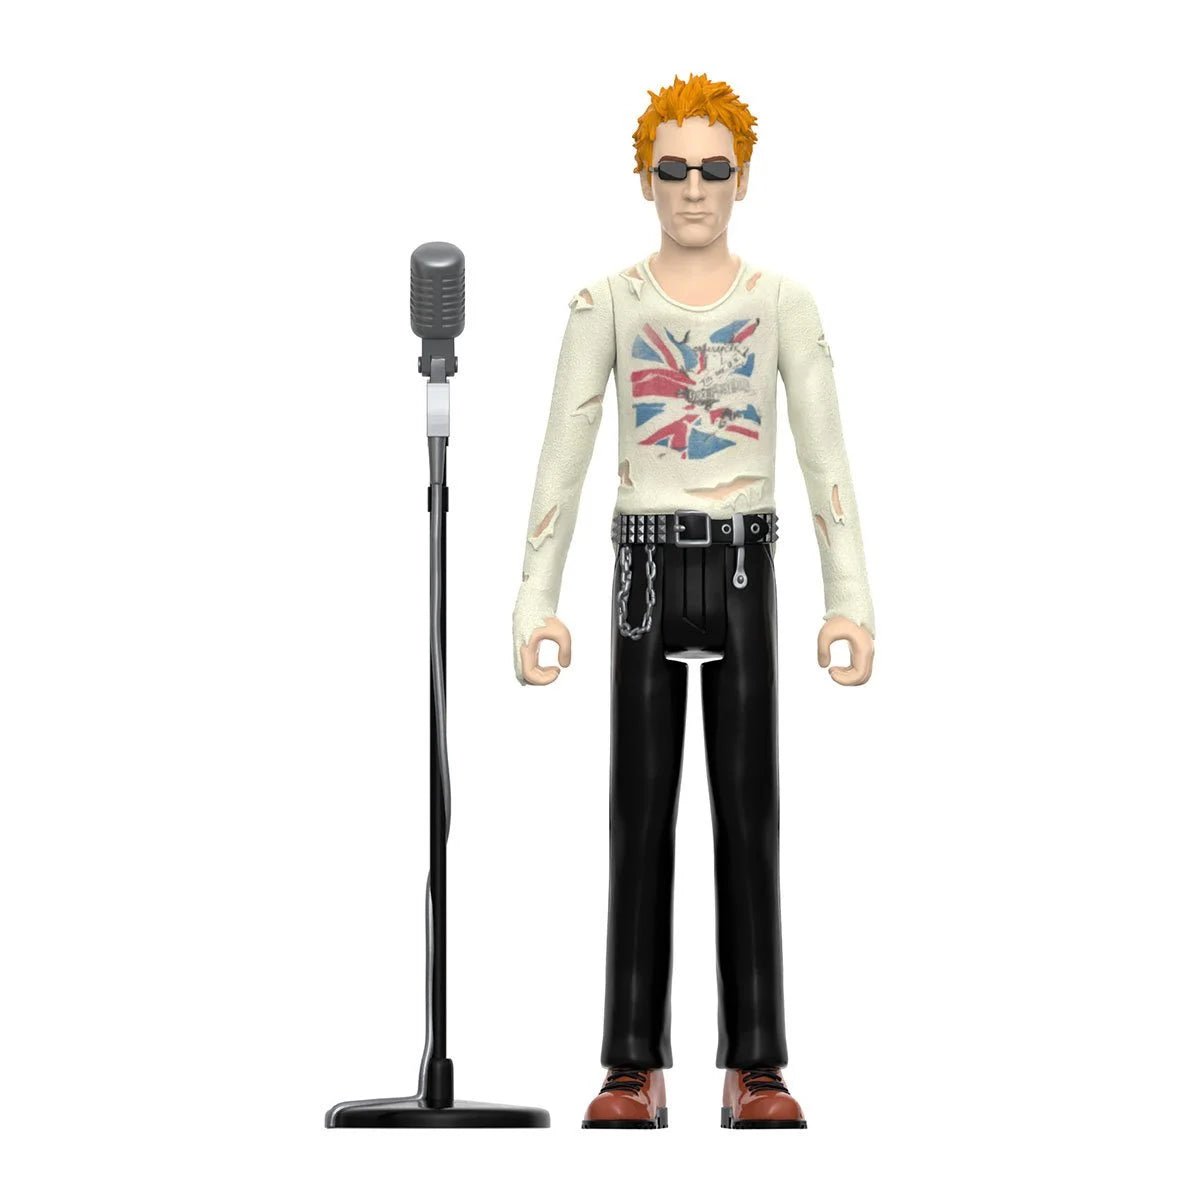 Sex Pistols Johnny Rotten 3 3/4-inch ReAction Figure  from Super7  - Simon's Collectibles  - Collectible dolls, toys and gifts for grown ups 